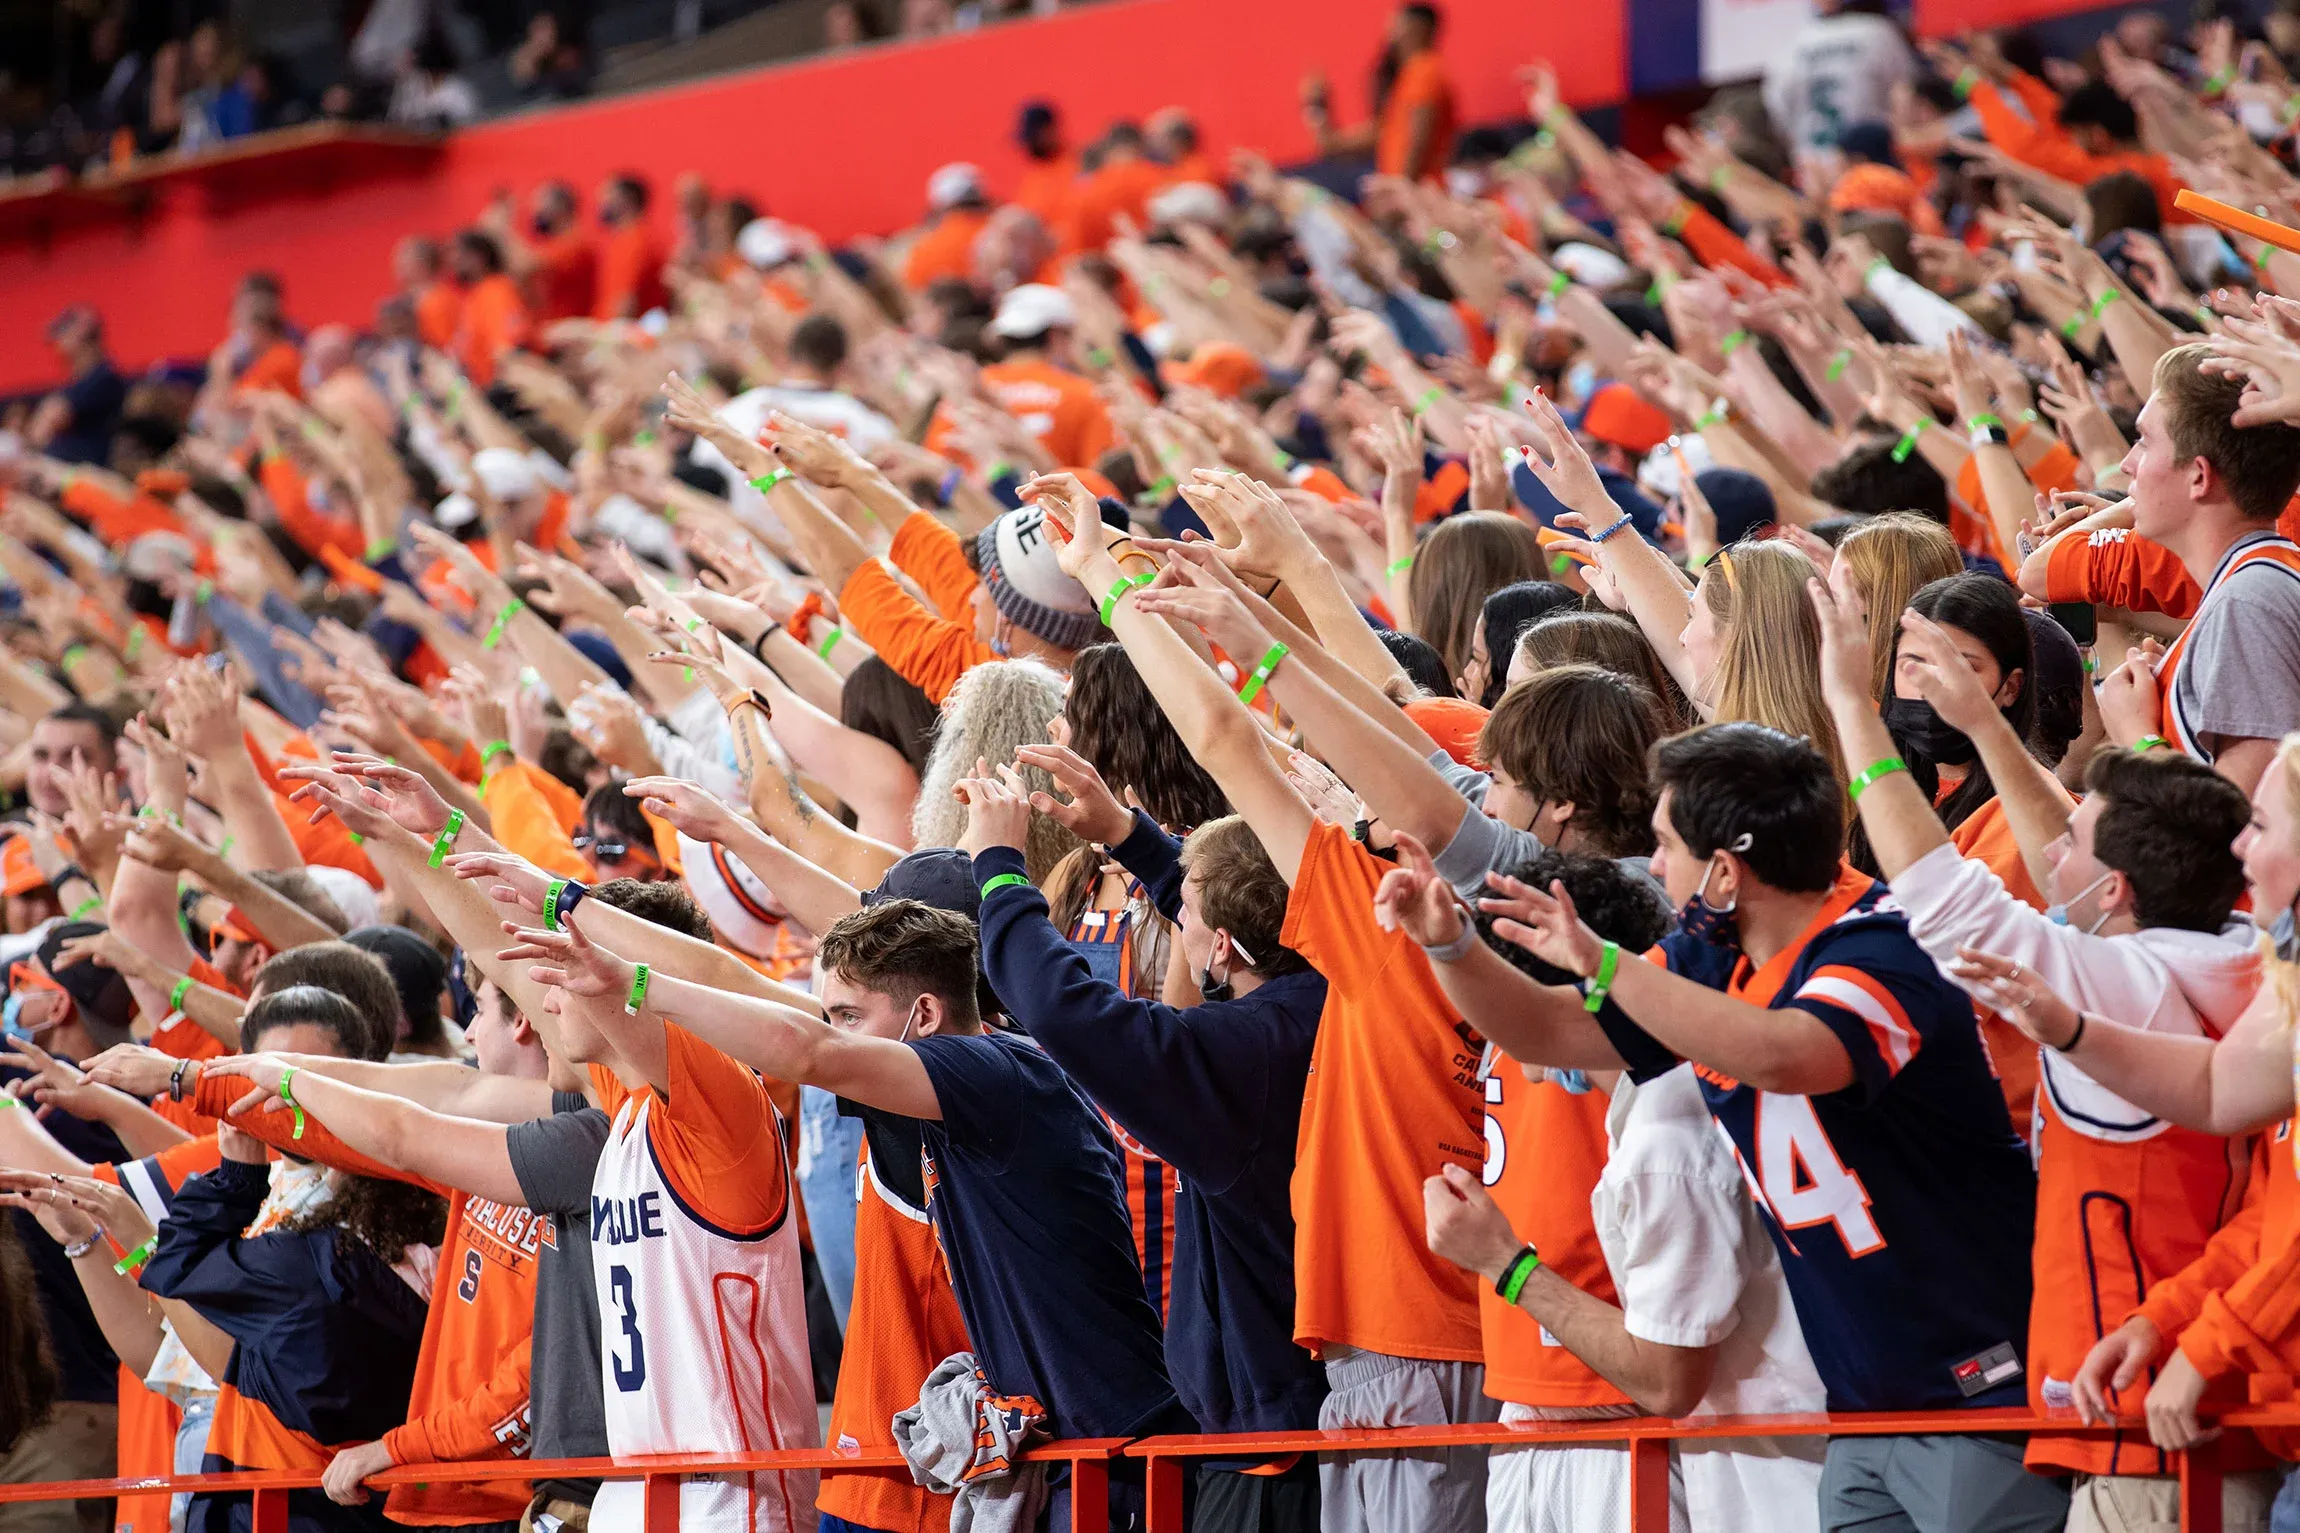 Students in the Dome cheering at a game.